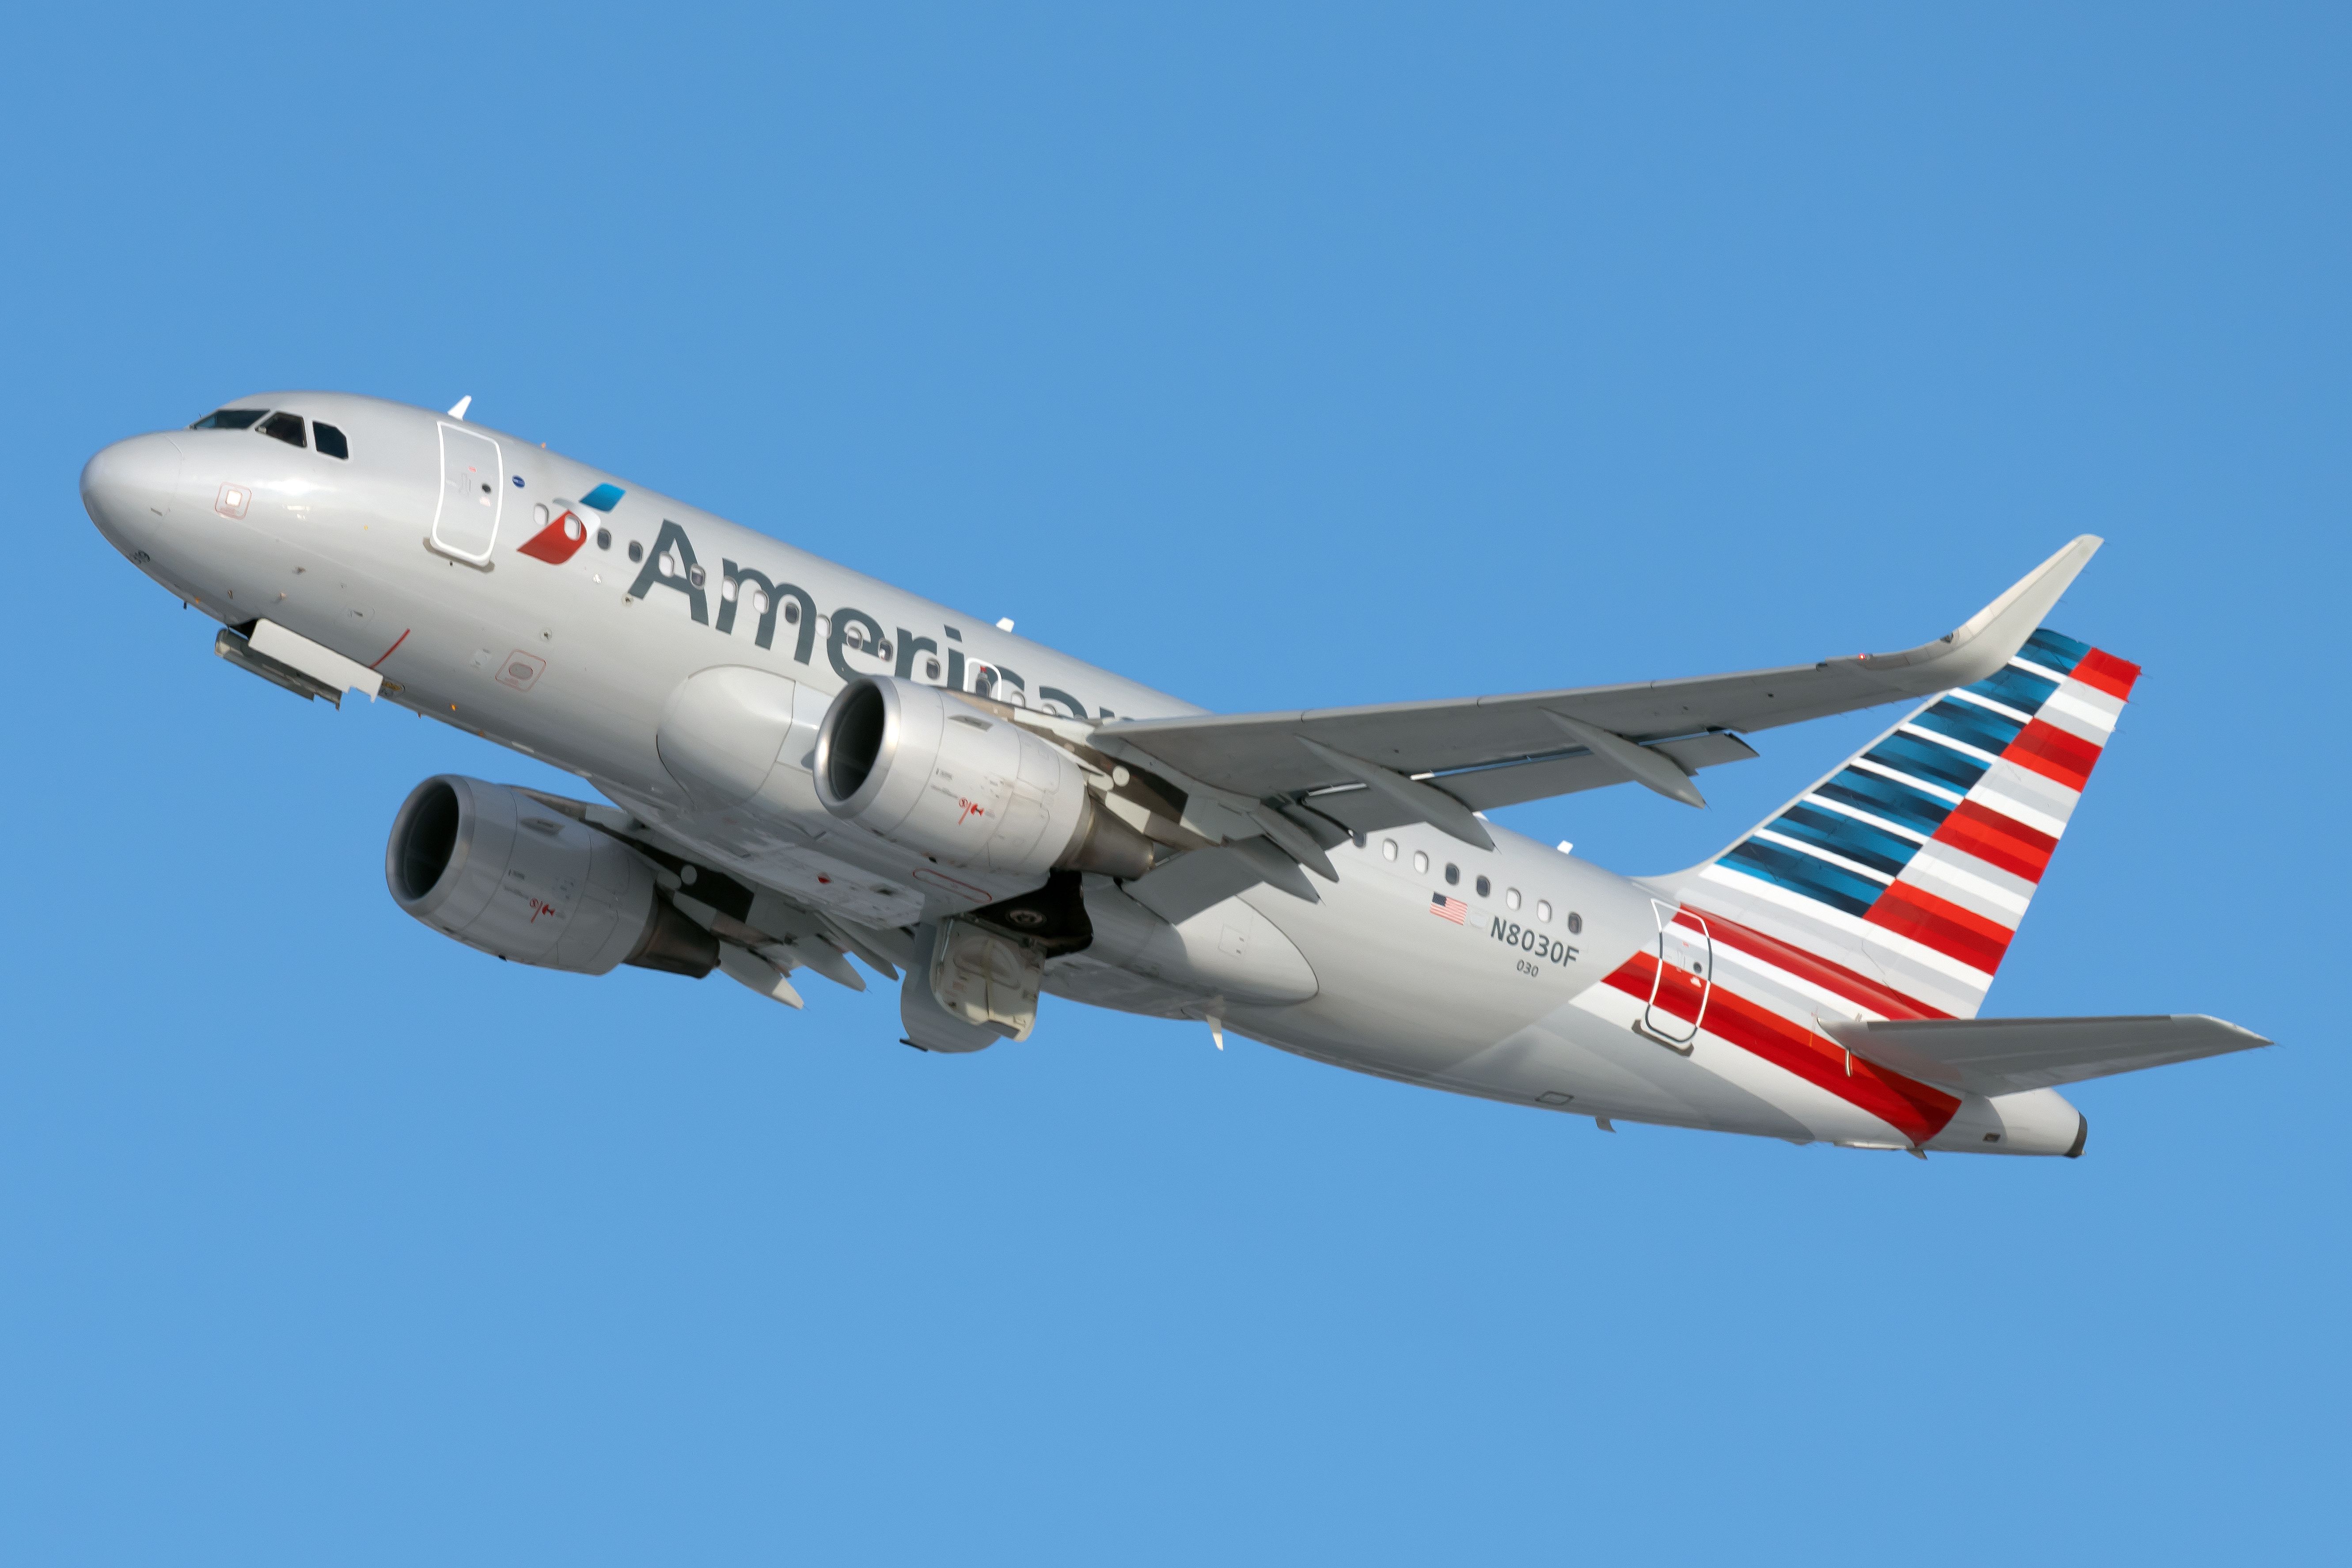 American Airlines Airbus A319-115 departing.